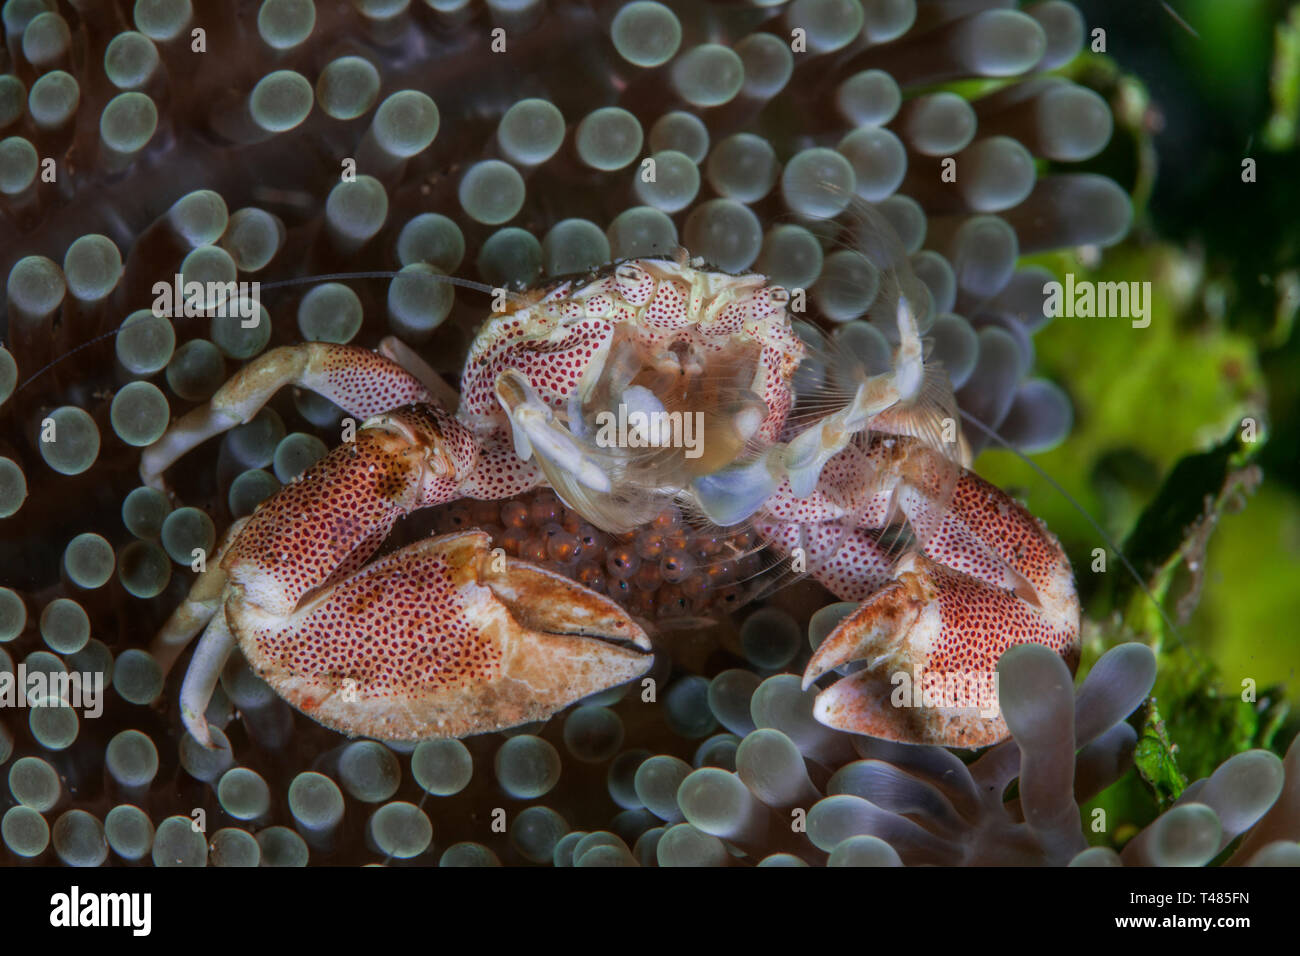 Spotted Porcelain crab with eggs sheltering in carpet anemone. Lembeh Straits, Indonesia. Stock Photo